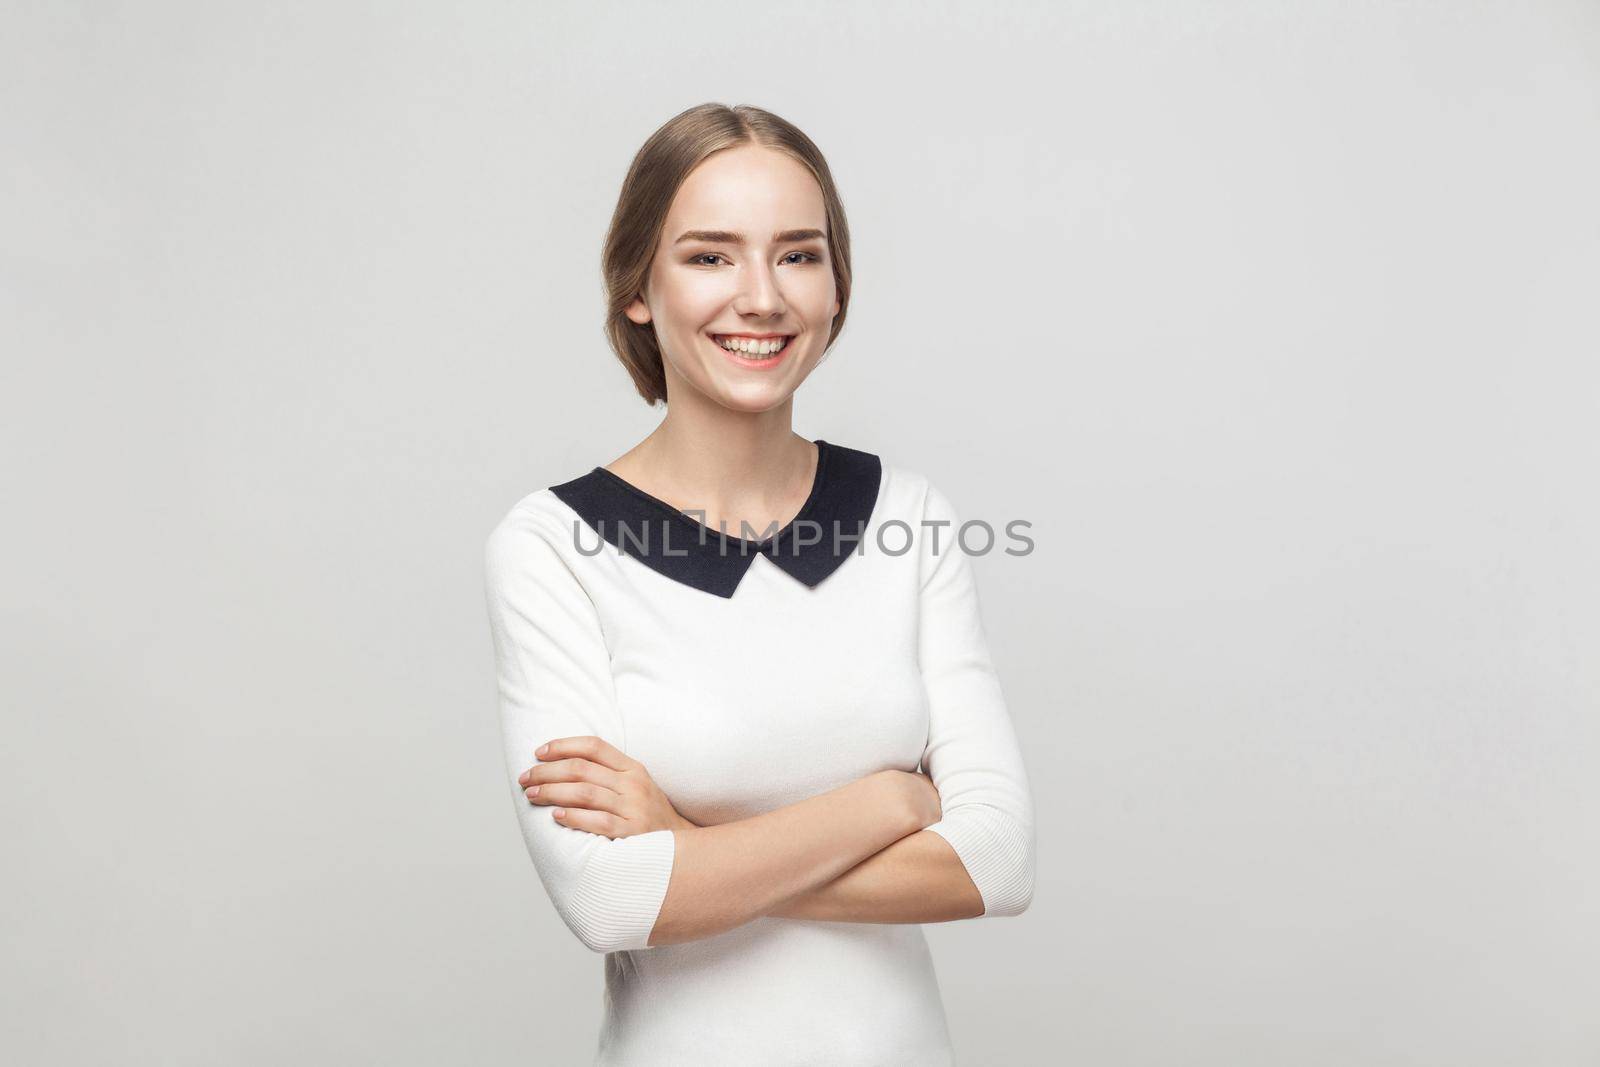 Businesswoman crossed hands, toothy smiling and looking at camera. Studio shot, gray background